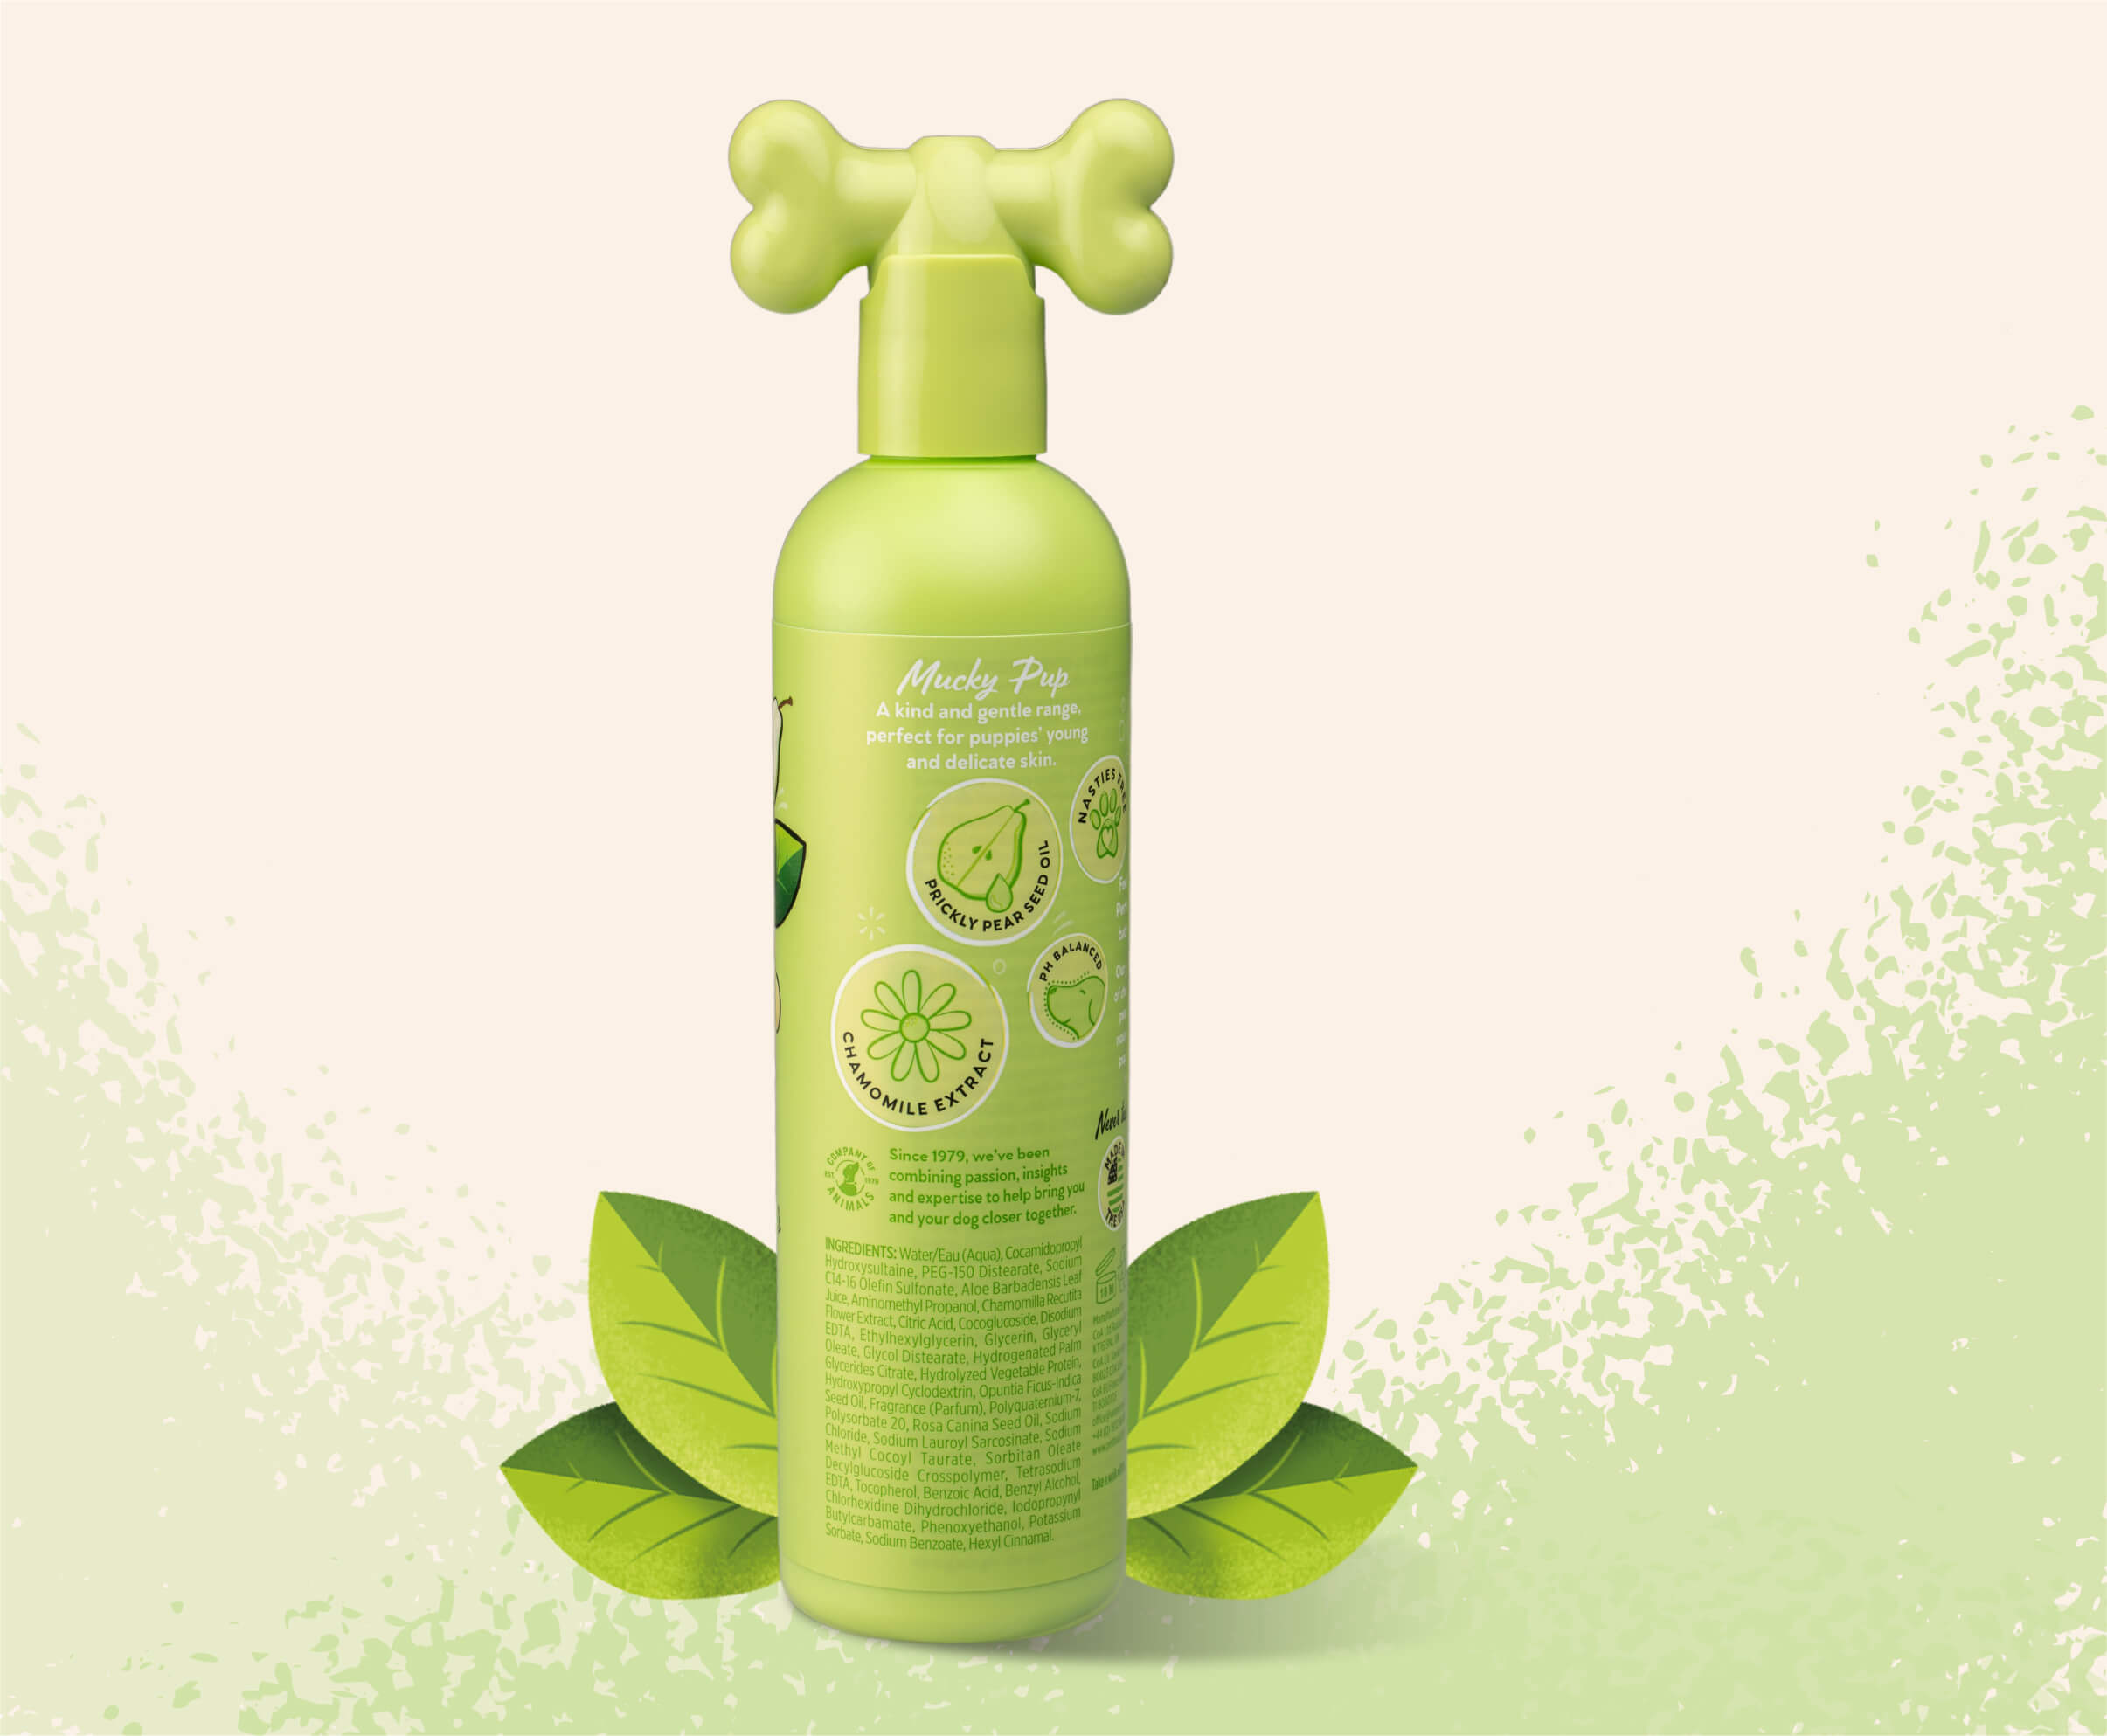 Product shot of the back of the Pet Head Mucky Pup shampoo